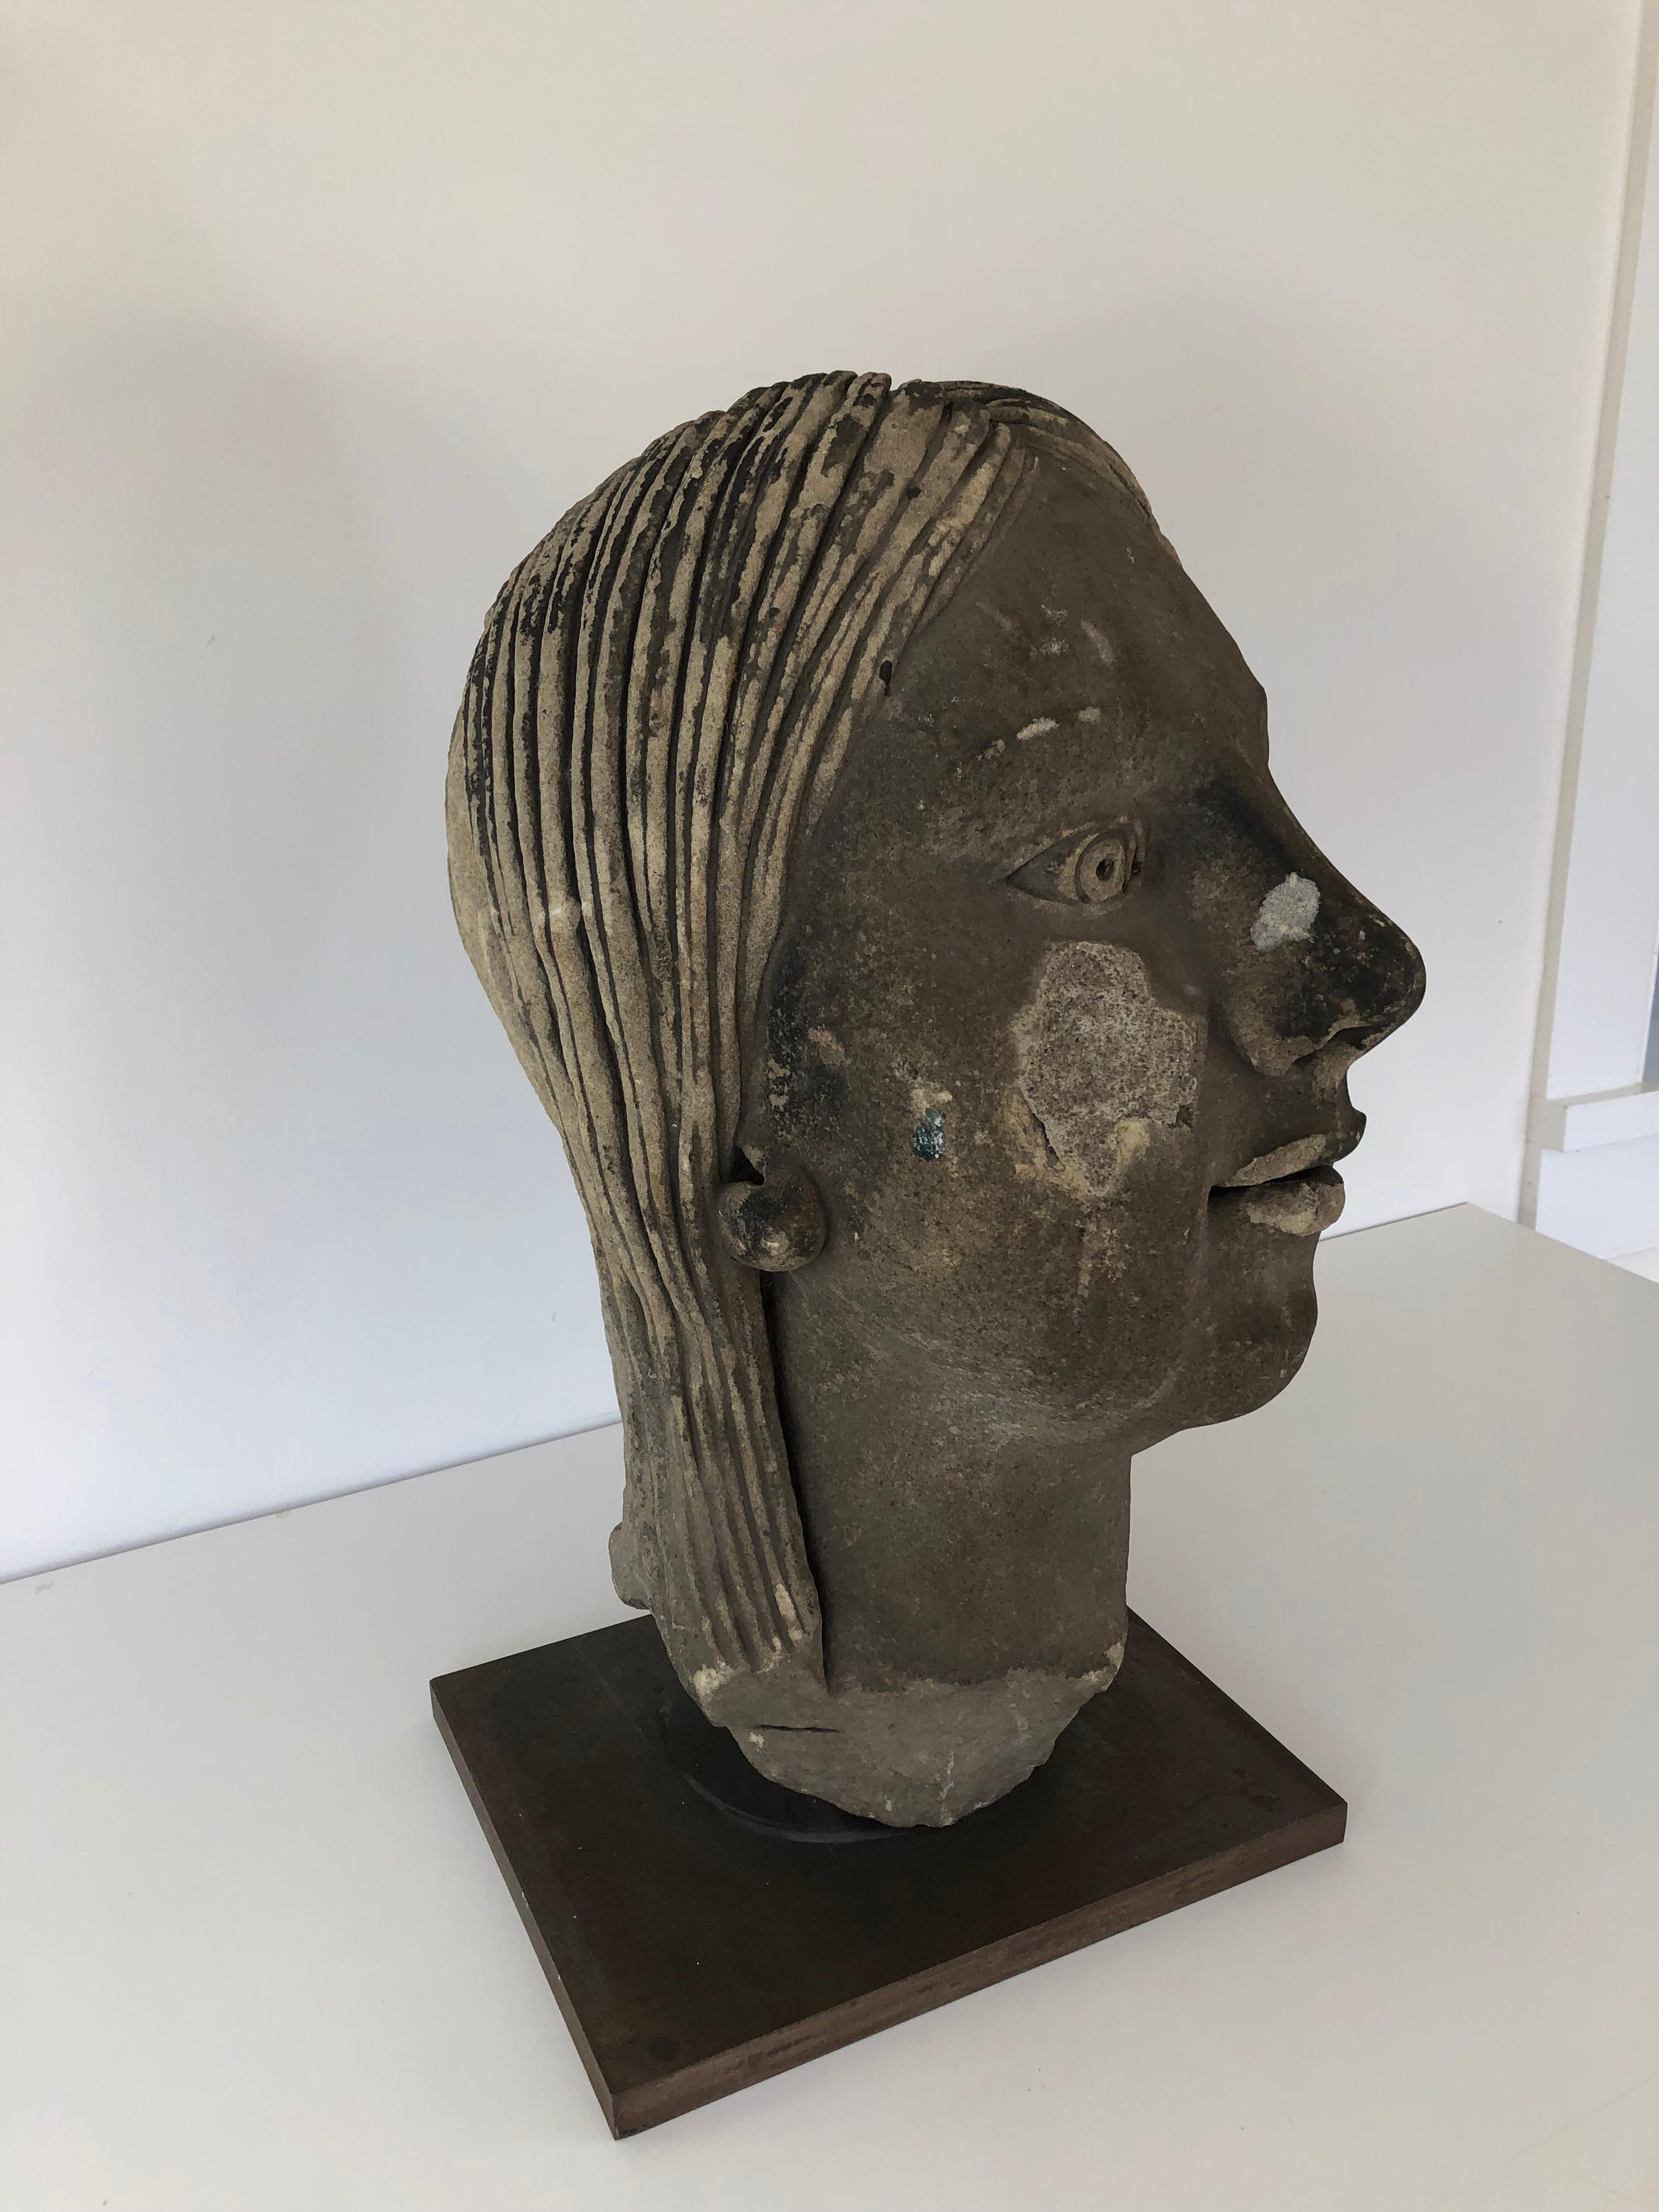 Unusual and unique Art Deco Period concrete fragment bust of a woman. Mounted on custom steel base. Base measures: 10